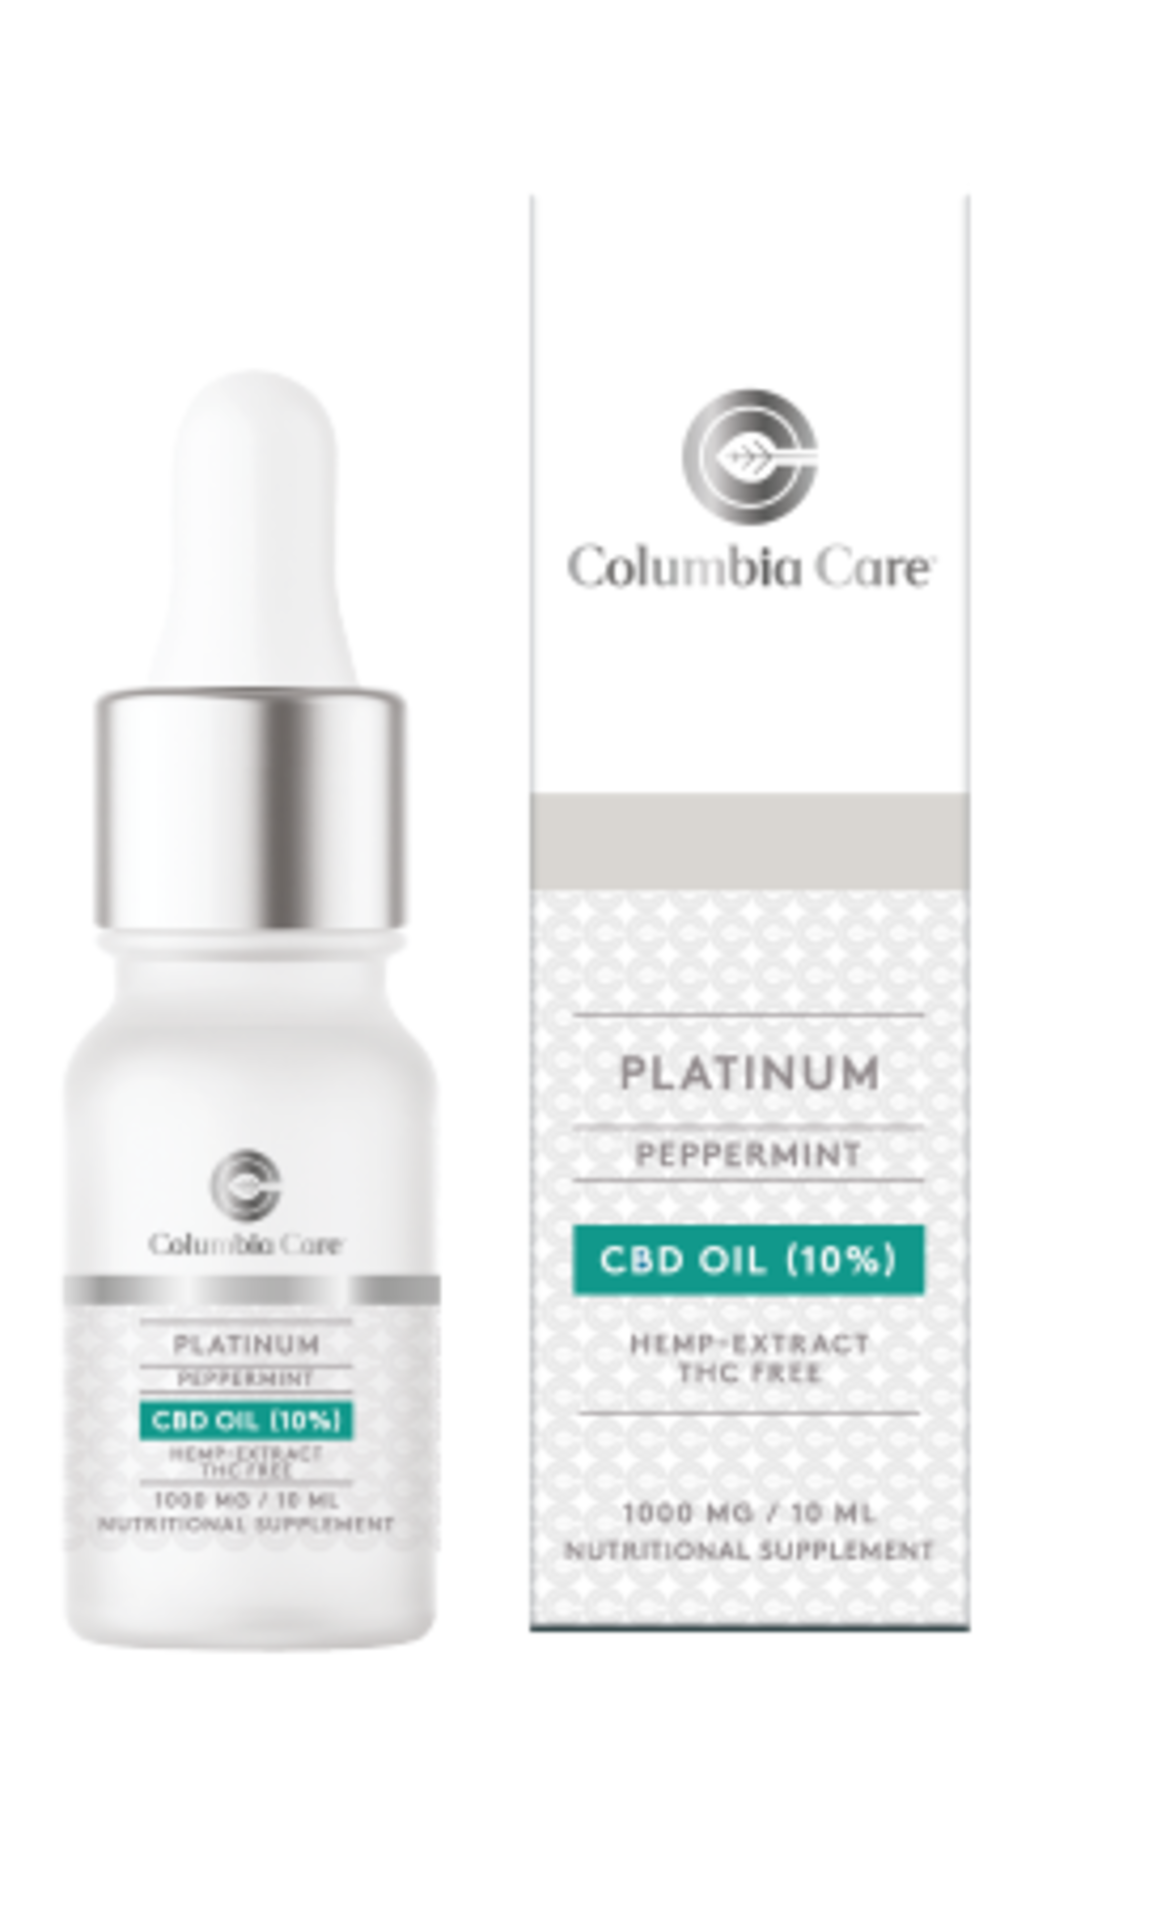 10 x Brand New Columbia Care Platinum Peppermint Flavored Tincture 10ml 1000mg. Columbia Care, a